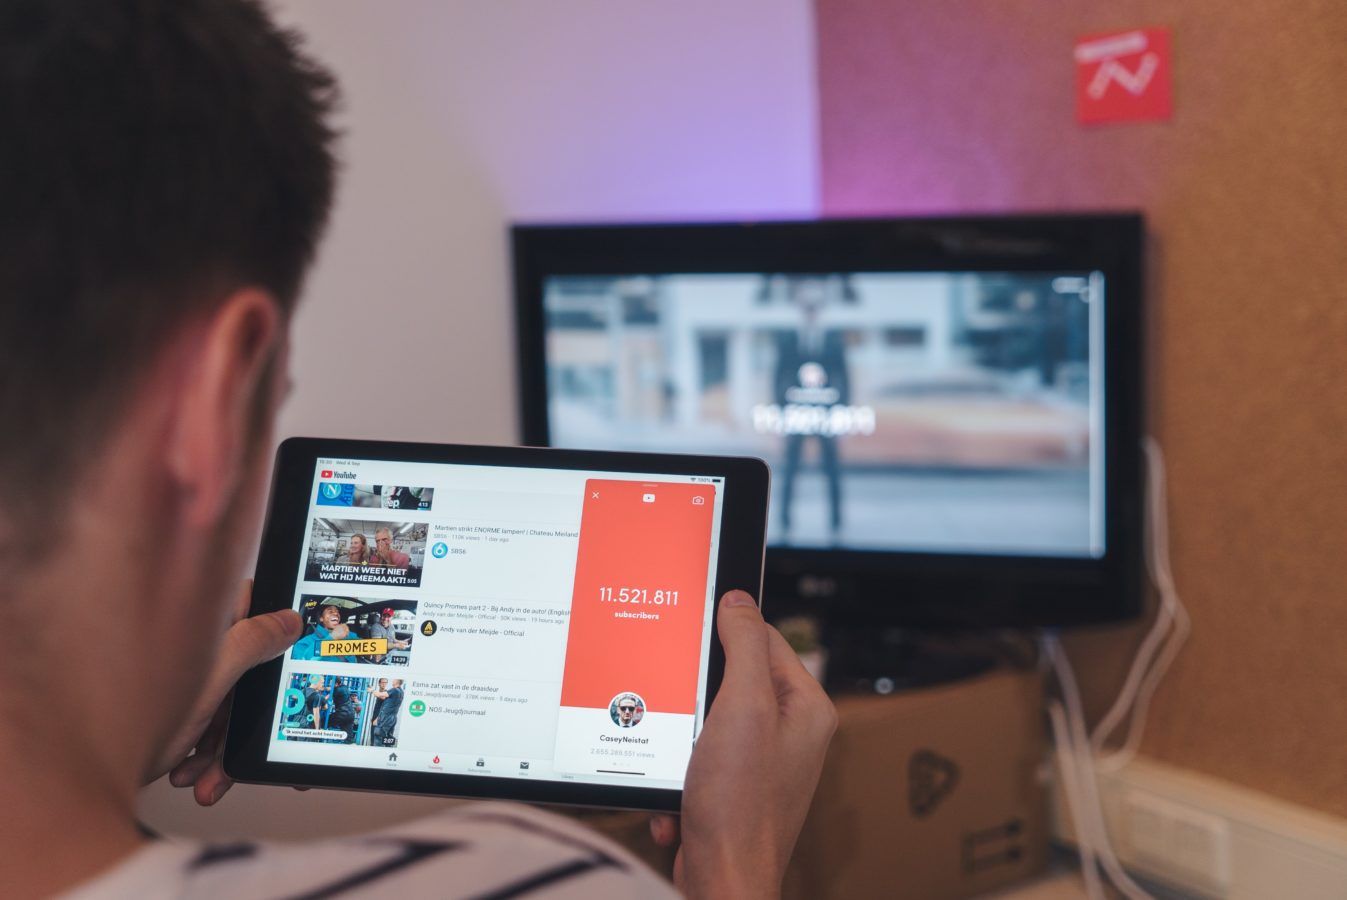 These are the 10 most-subscribed YouTube channels in the world